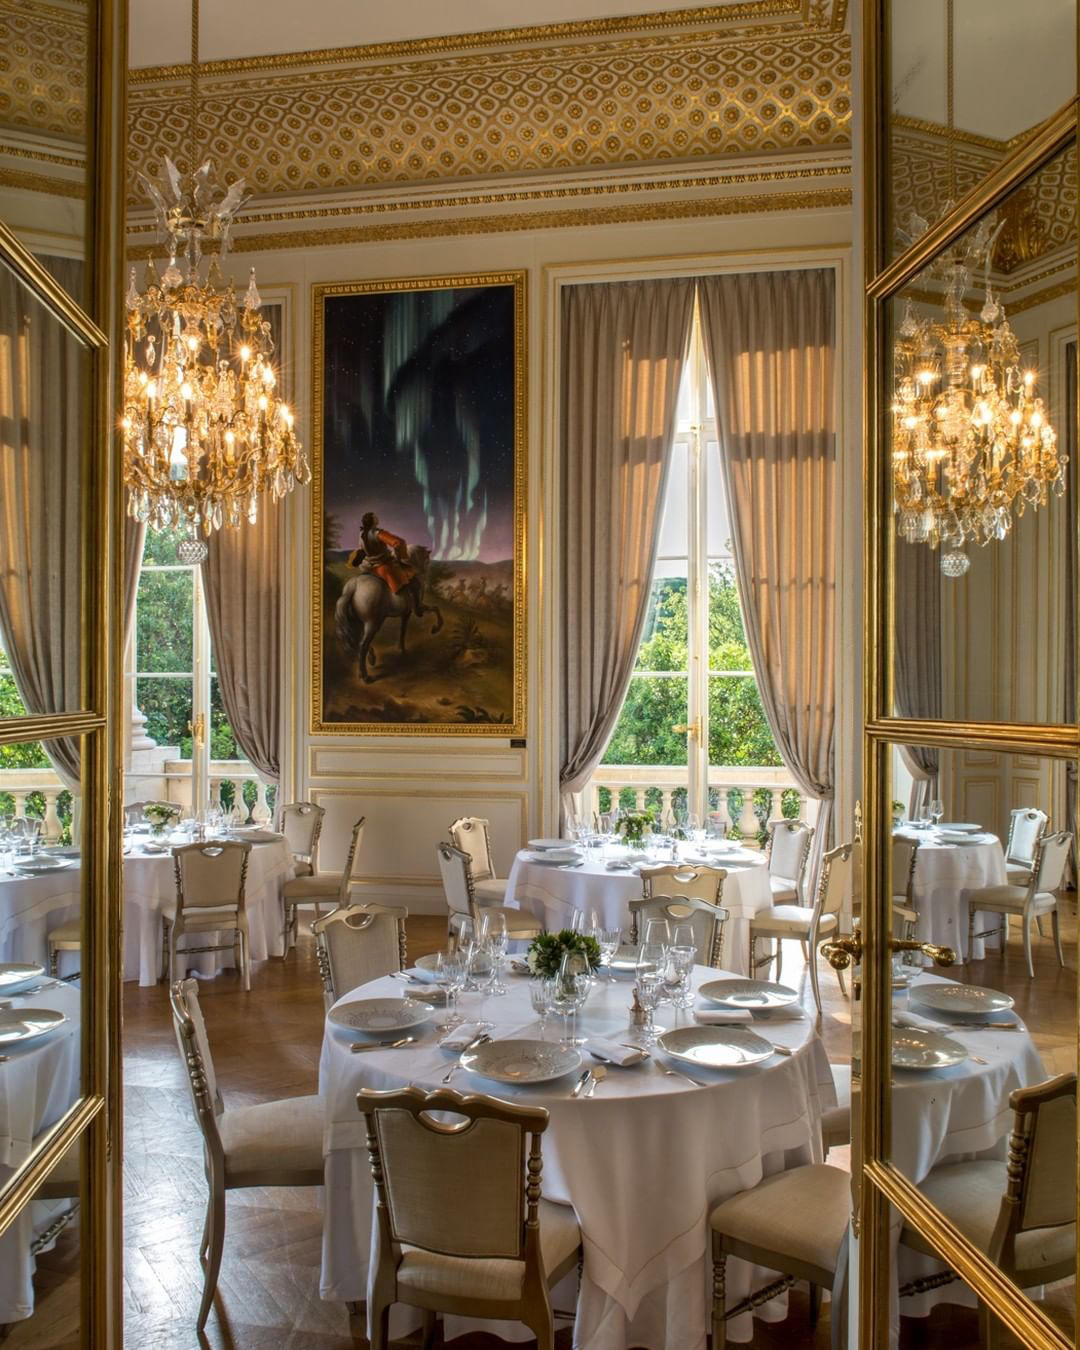 Hôtel de Crillon - Birthday, wedding, Baby Shower, … - We always have a good reason to celebrate with friends and